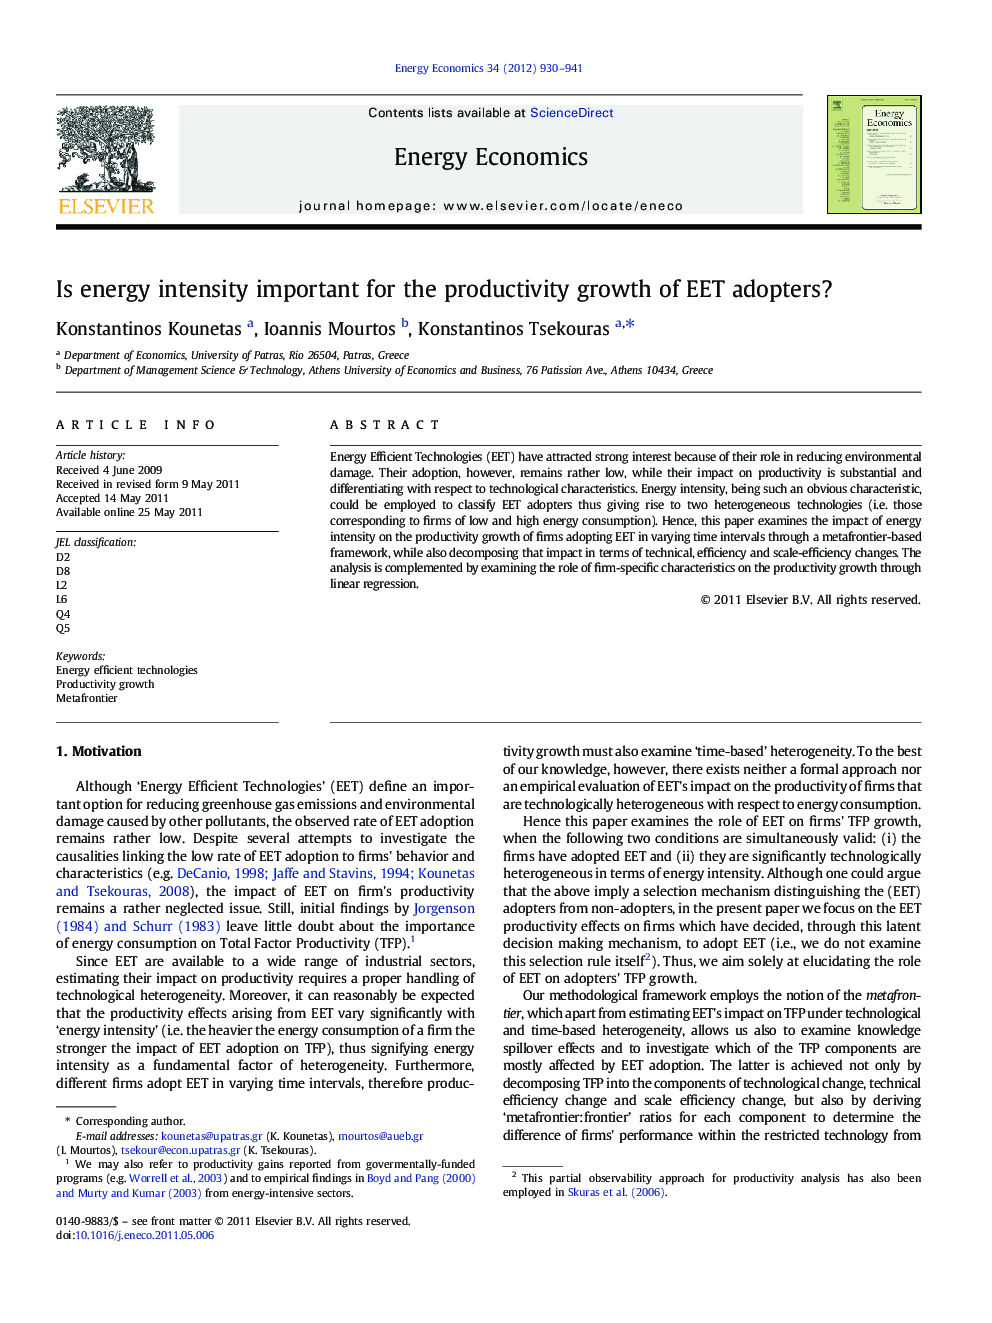 Is energy intensity important for the productivity growth of EET adopters?